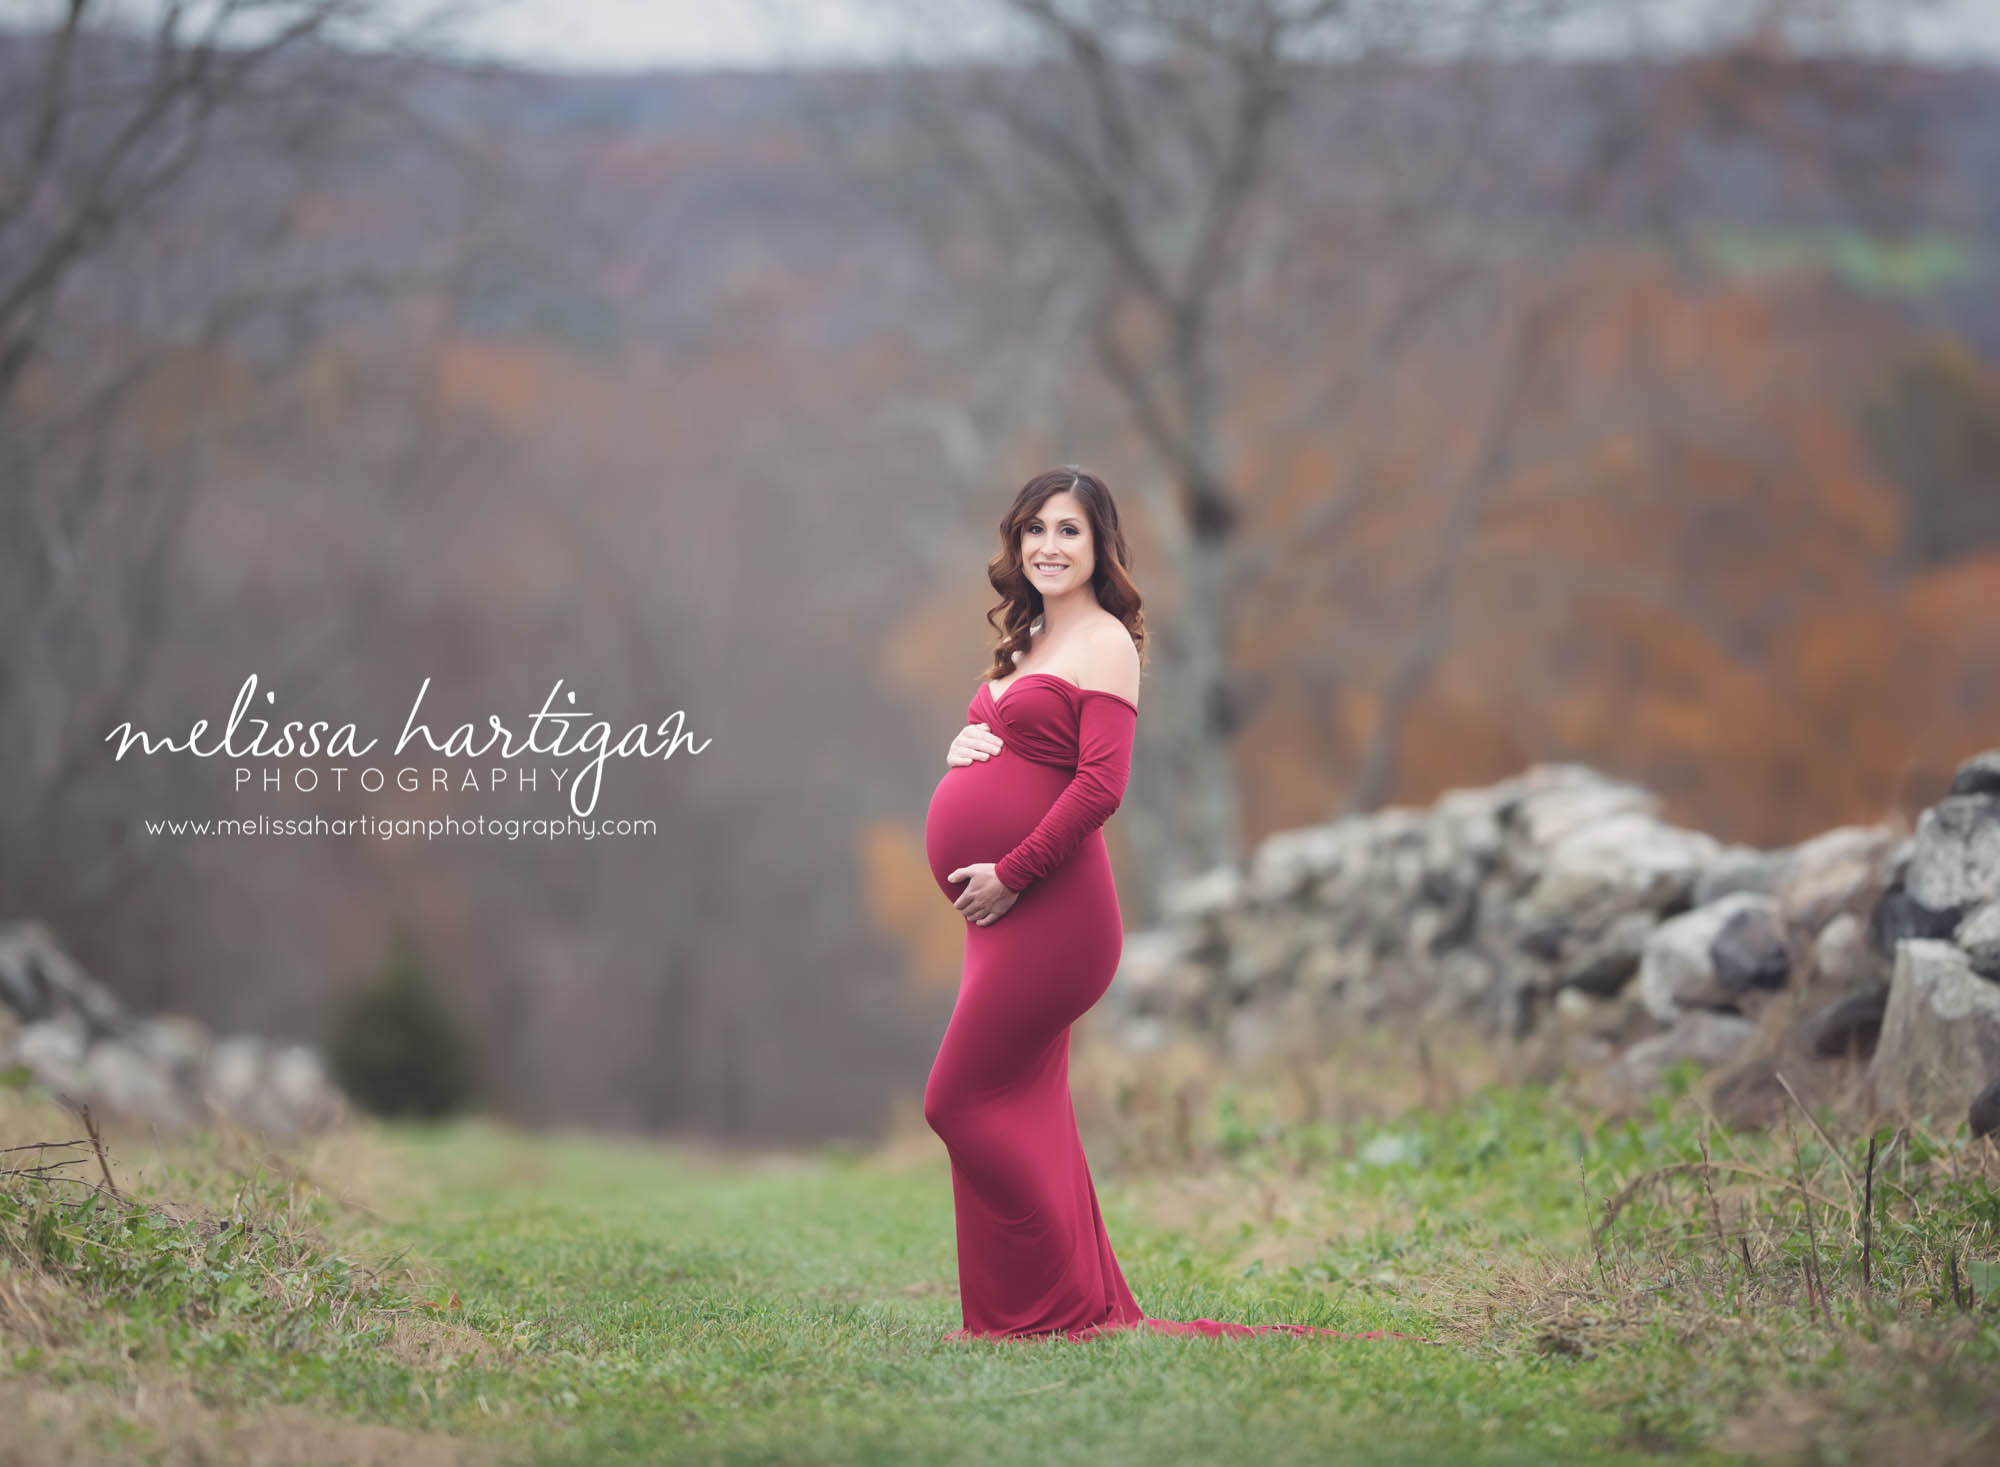 Melissa Hartigan Photography Coventry CT Newborn & Maternity Photographer Coventry CT Maternity Newborn Session Carrie wearing red maternity gown standing in field